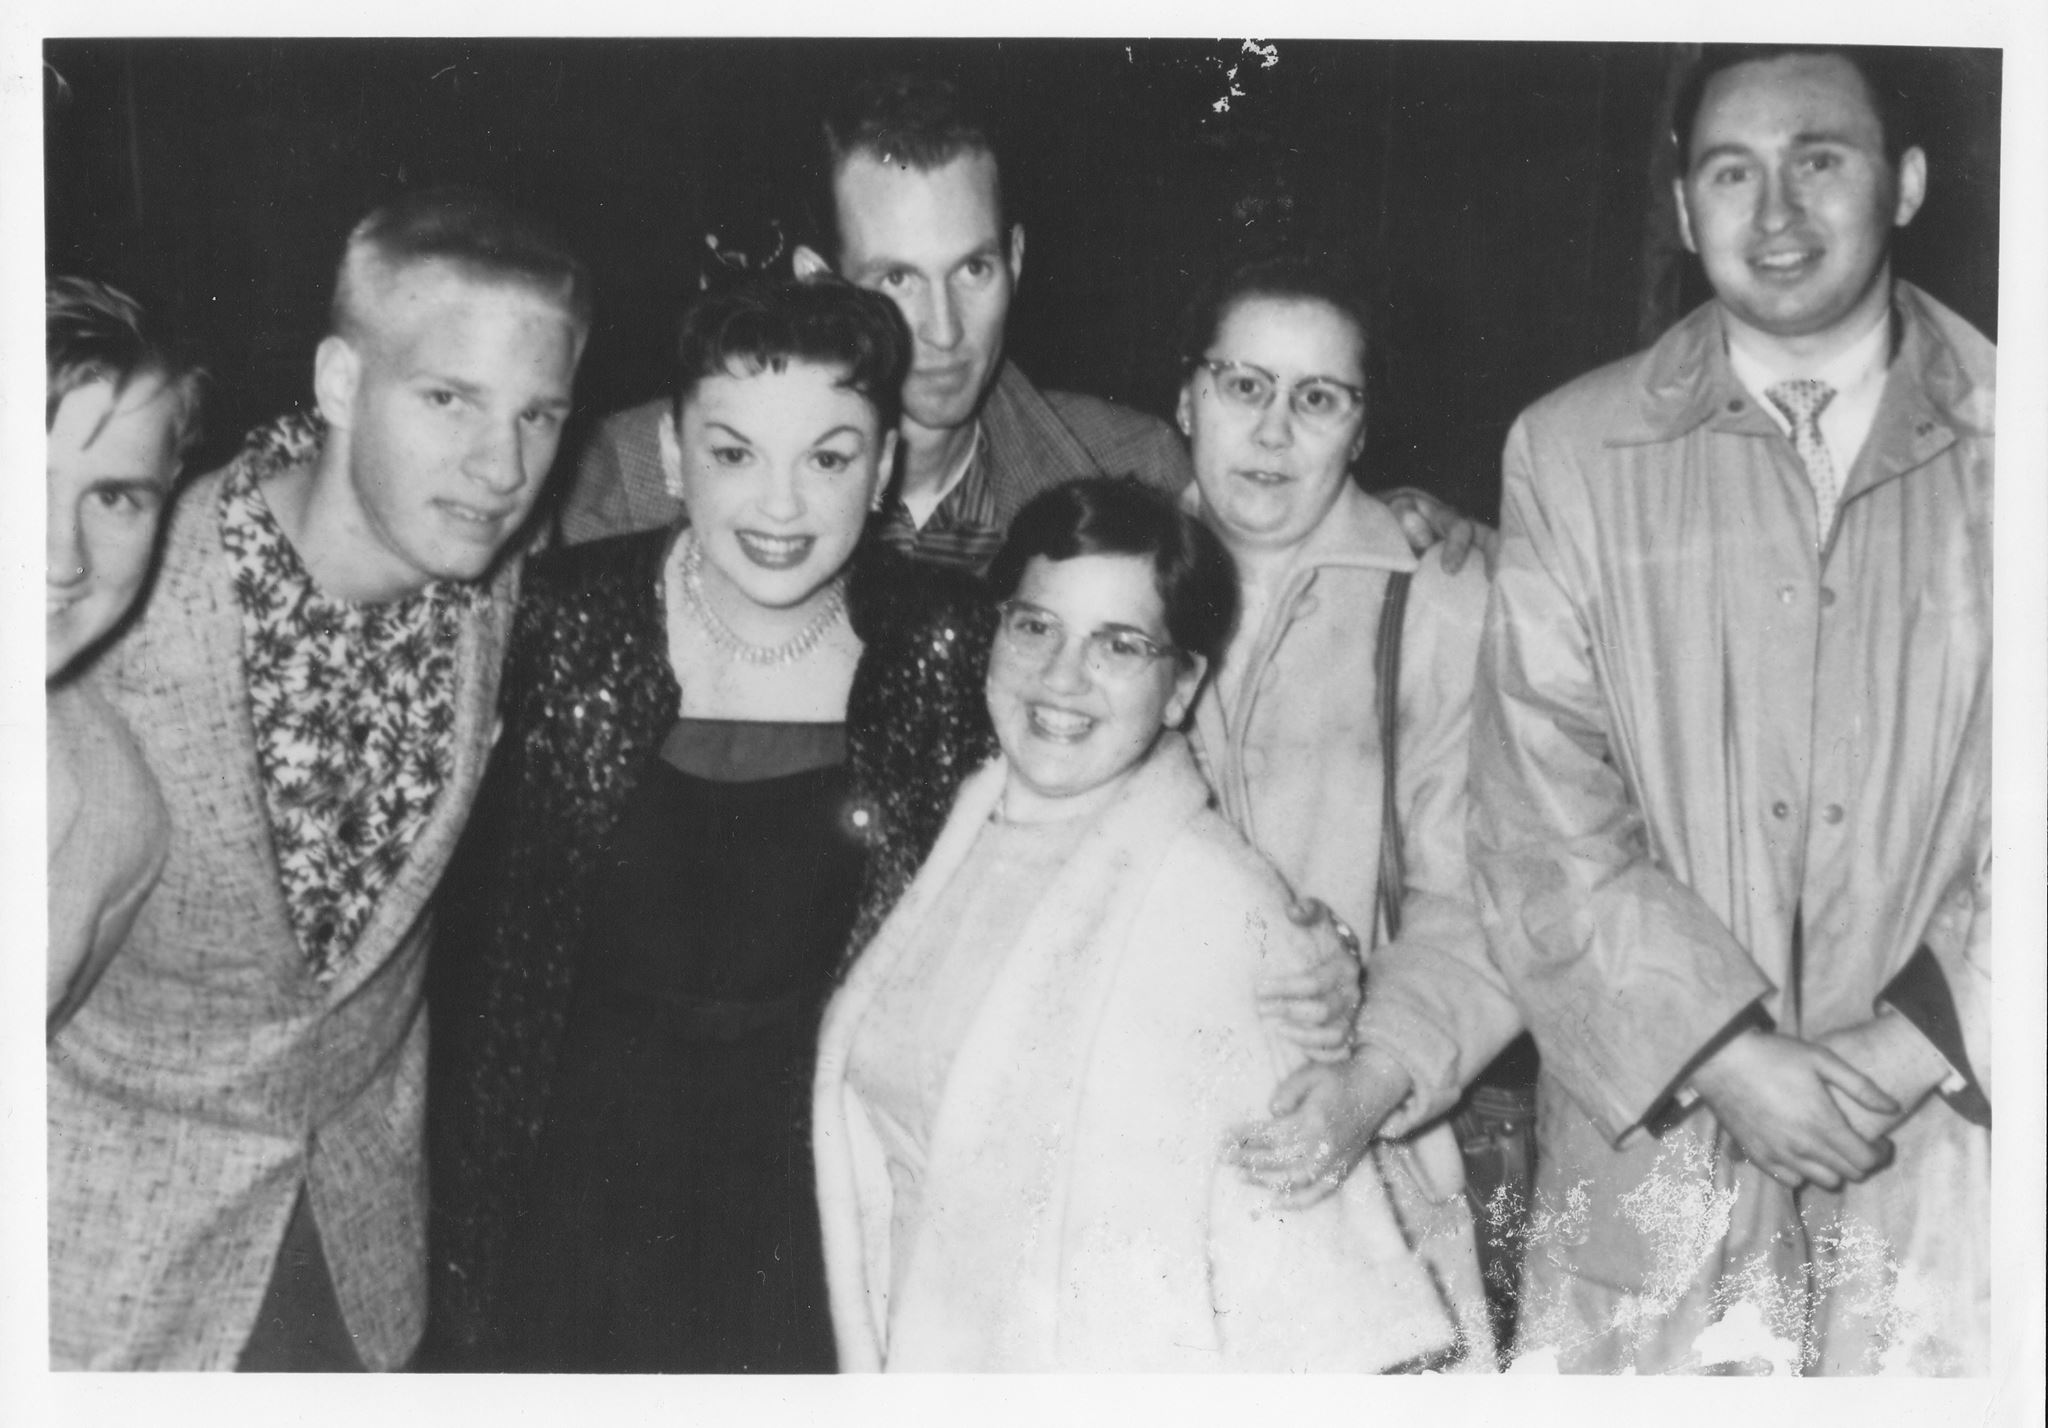 Albert Poland (left) with Judy Garland and her fans, 1957.